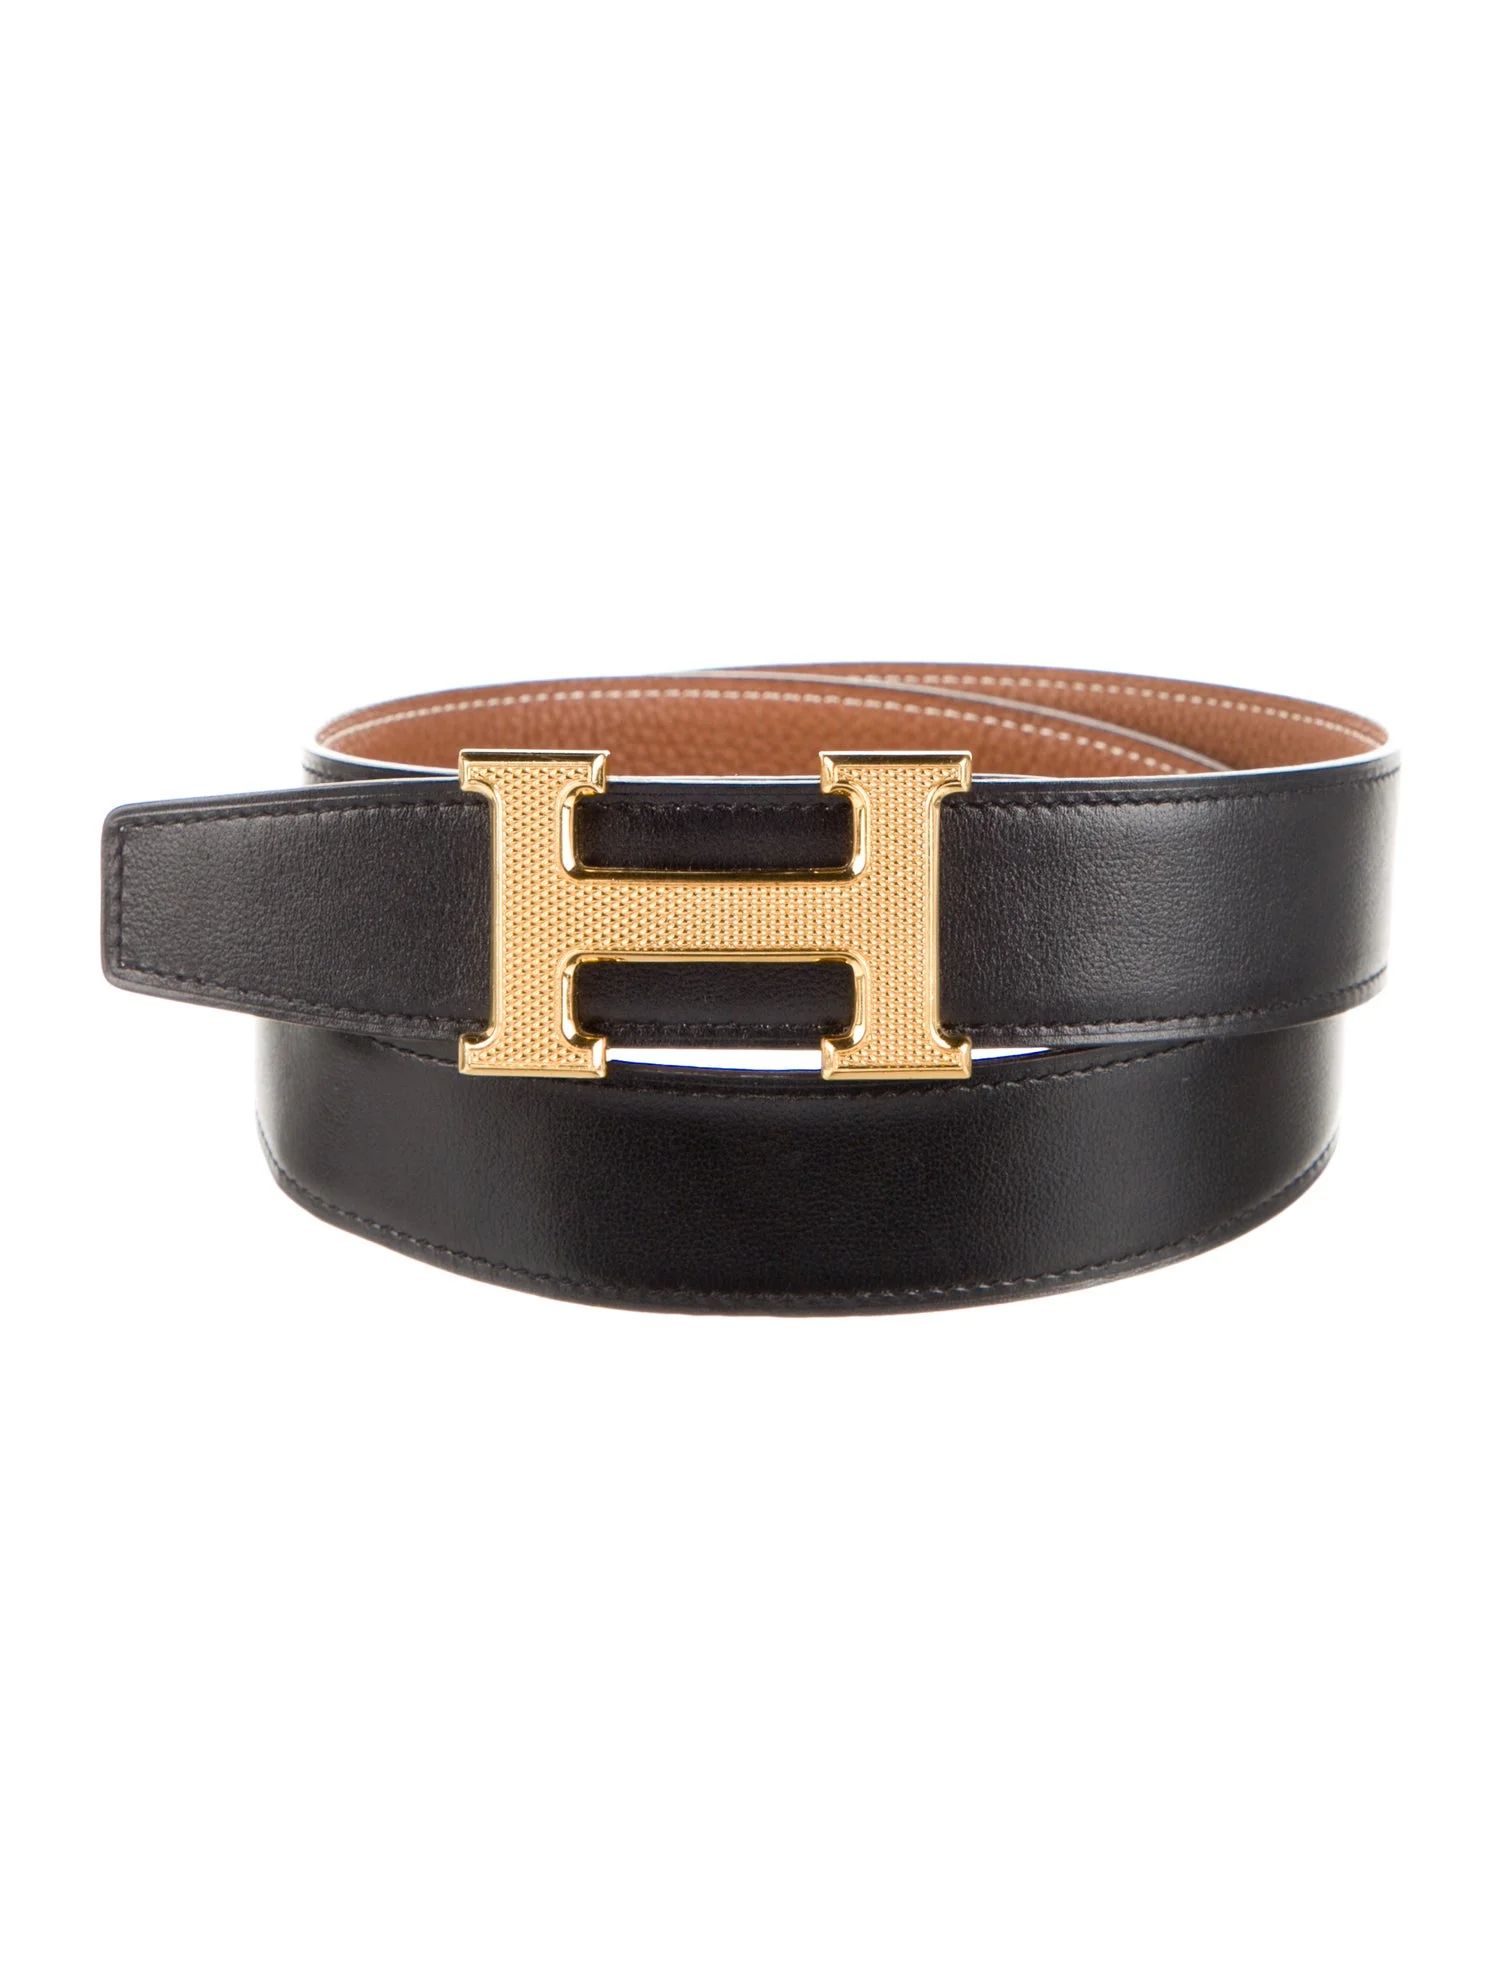 Reversible 32 mm H Guilloché Belt Kit | The RealReal